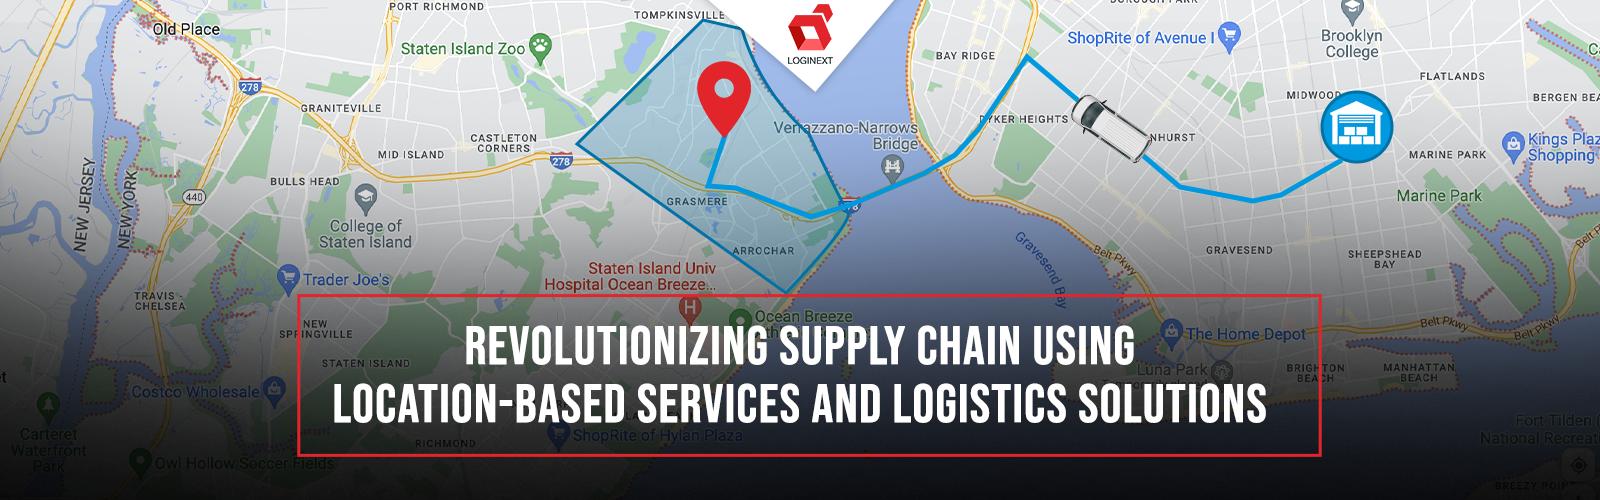 Location-Based Services and Logistics Solutions_ Revolutionizing Supply Chain Operations